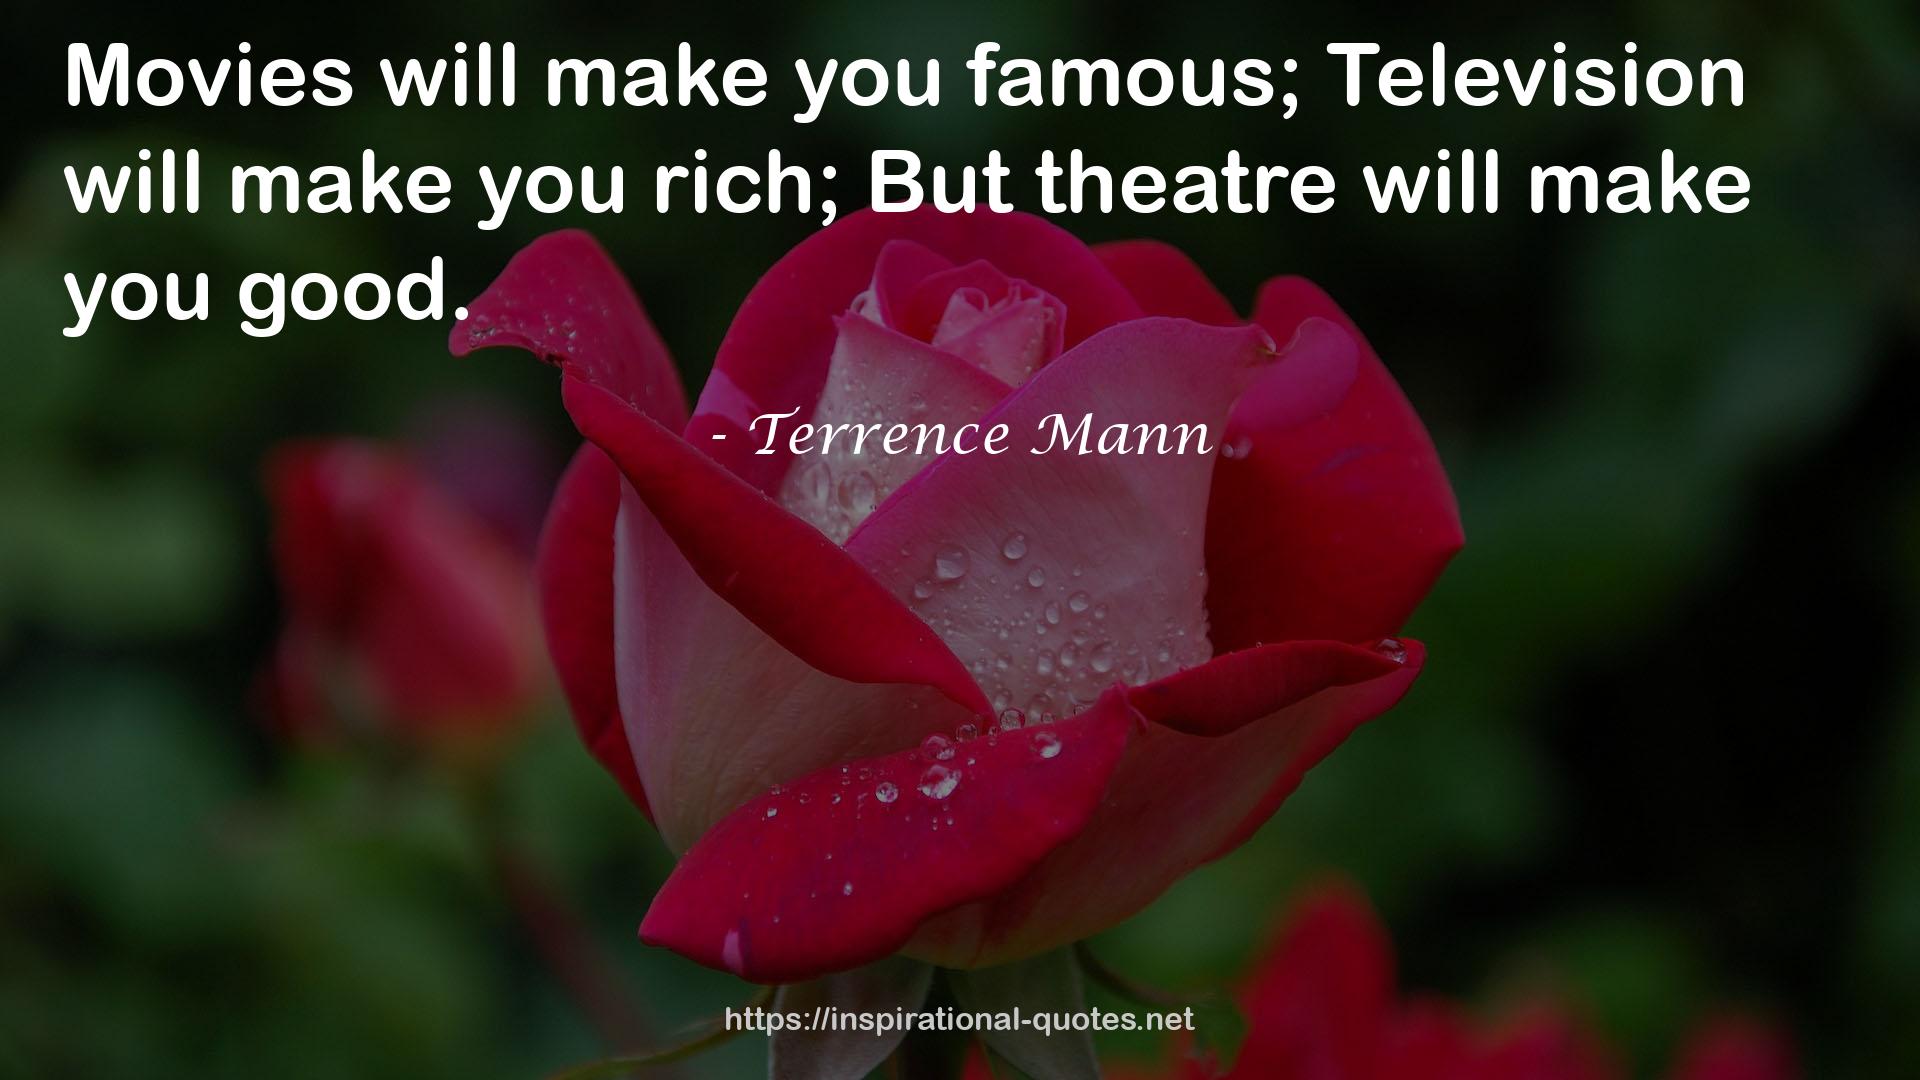 Terrence Mann QUOTES